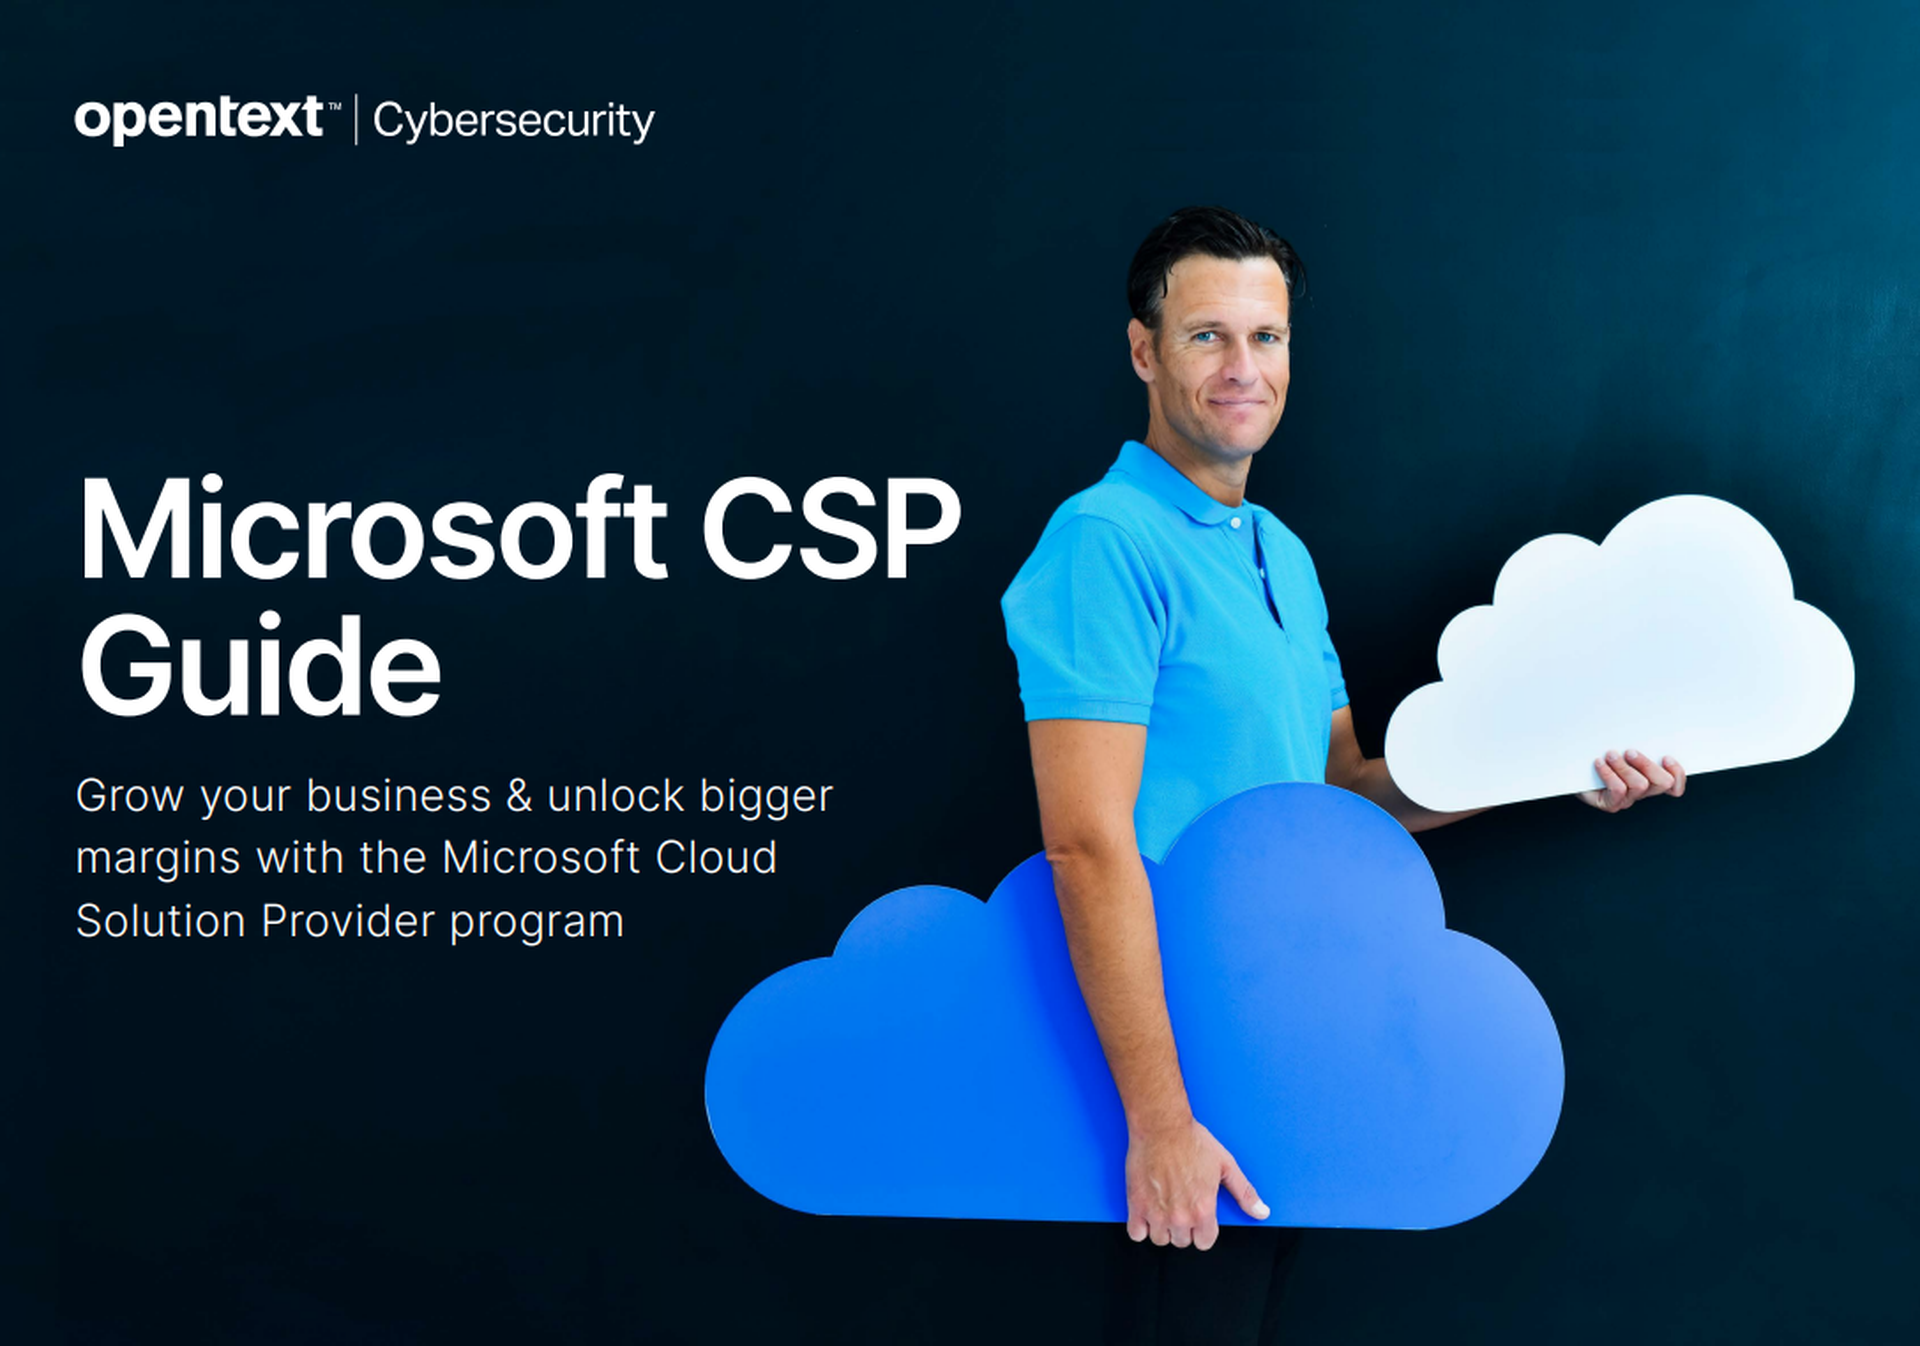 Microsoft CSP Guide brought to you by OpenText Cybersecurity